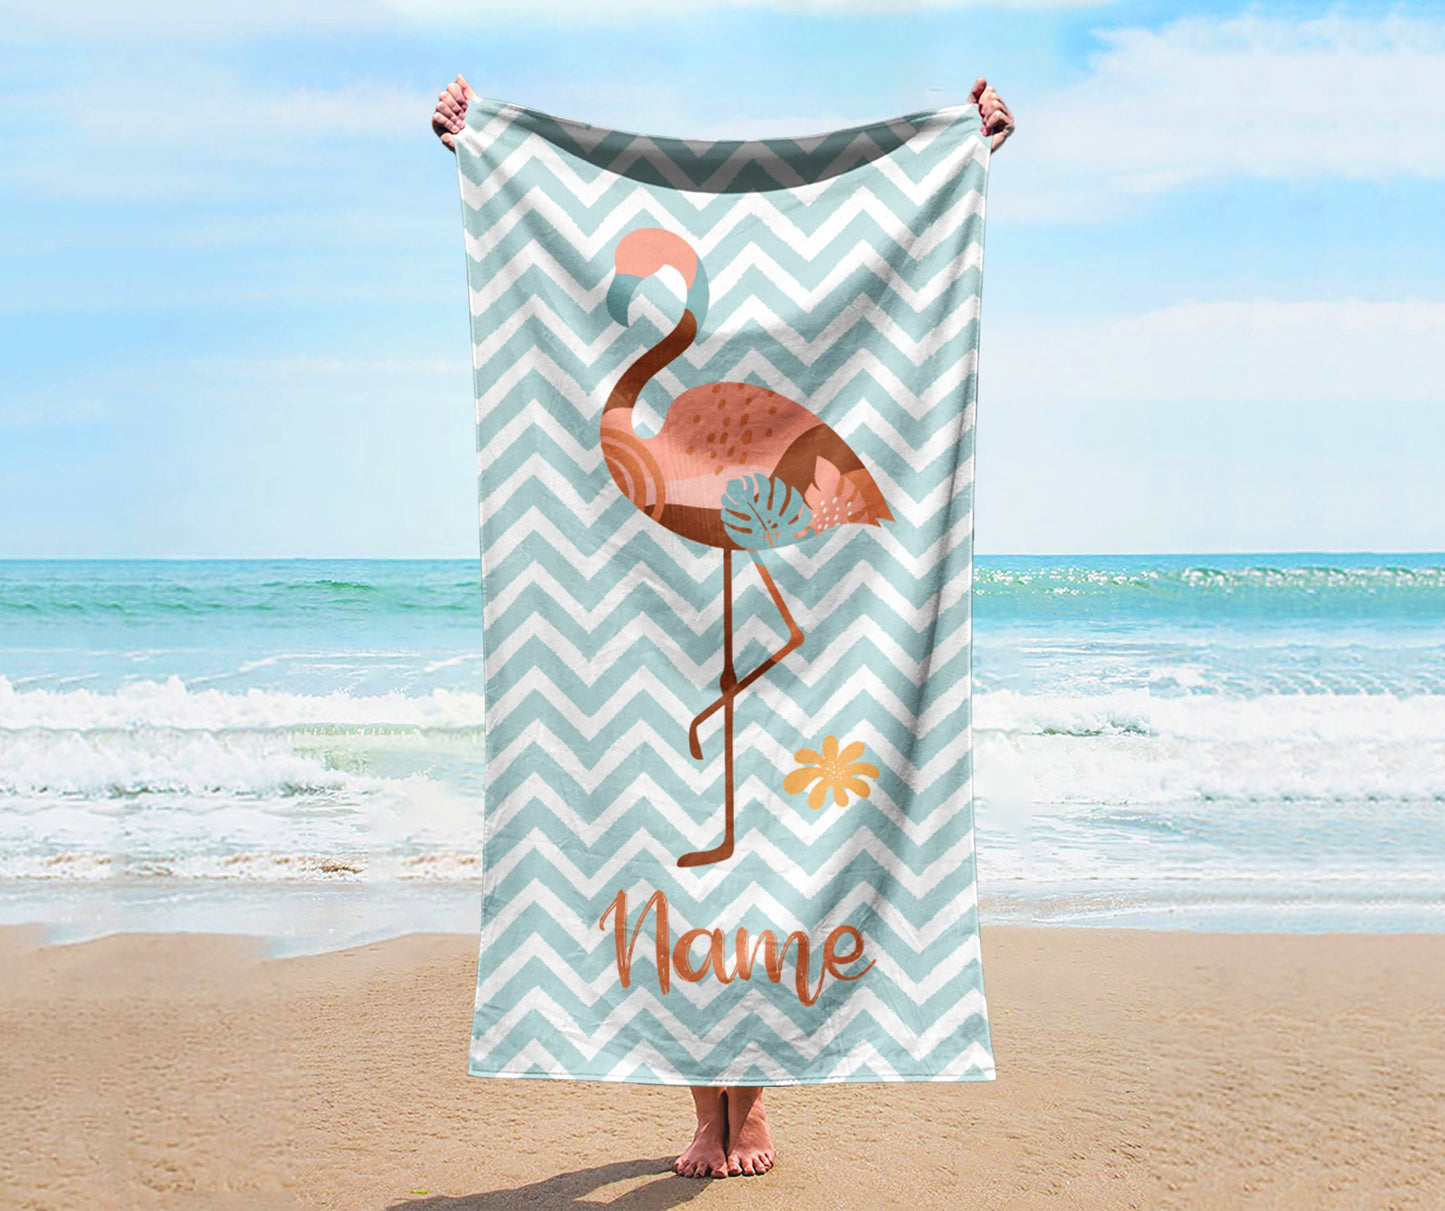 NEW Design Personalized Beach & Pool Towel Custom Pool Towel Beach Towel With Name Outside Birthday Vacation Gift